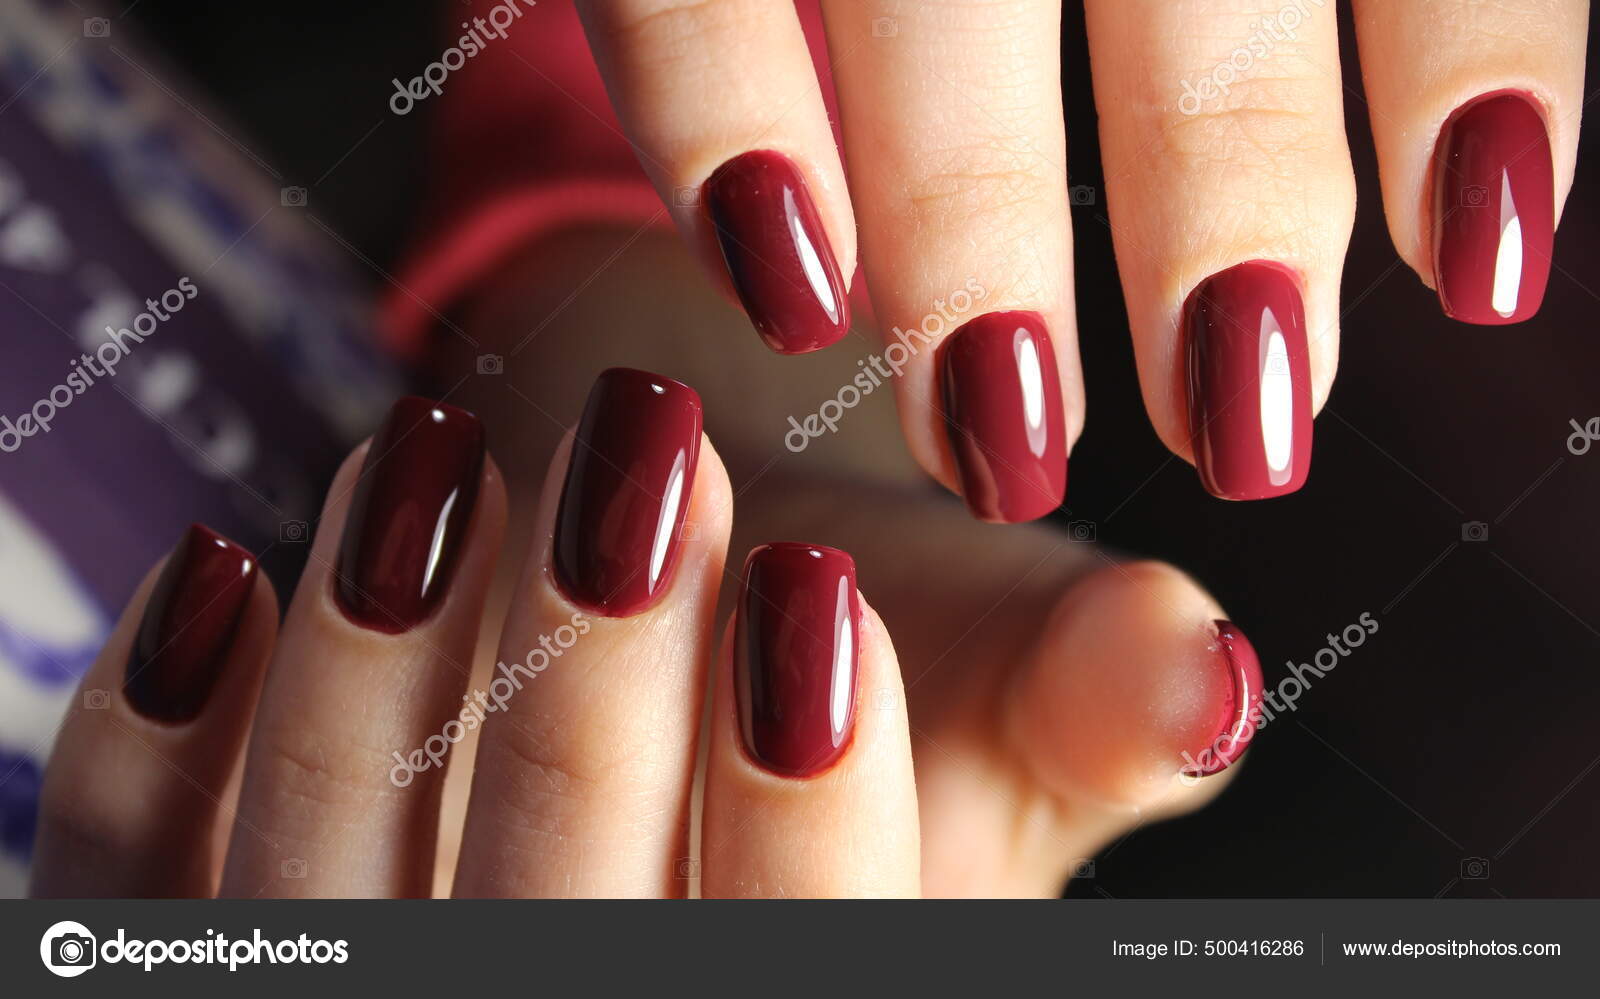 Beautiful Manicured Woman S Hands with Red Nail Polish Stock Image - Image  of polish, fingernails: 32058121